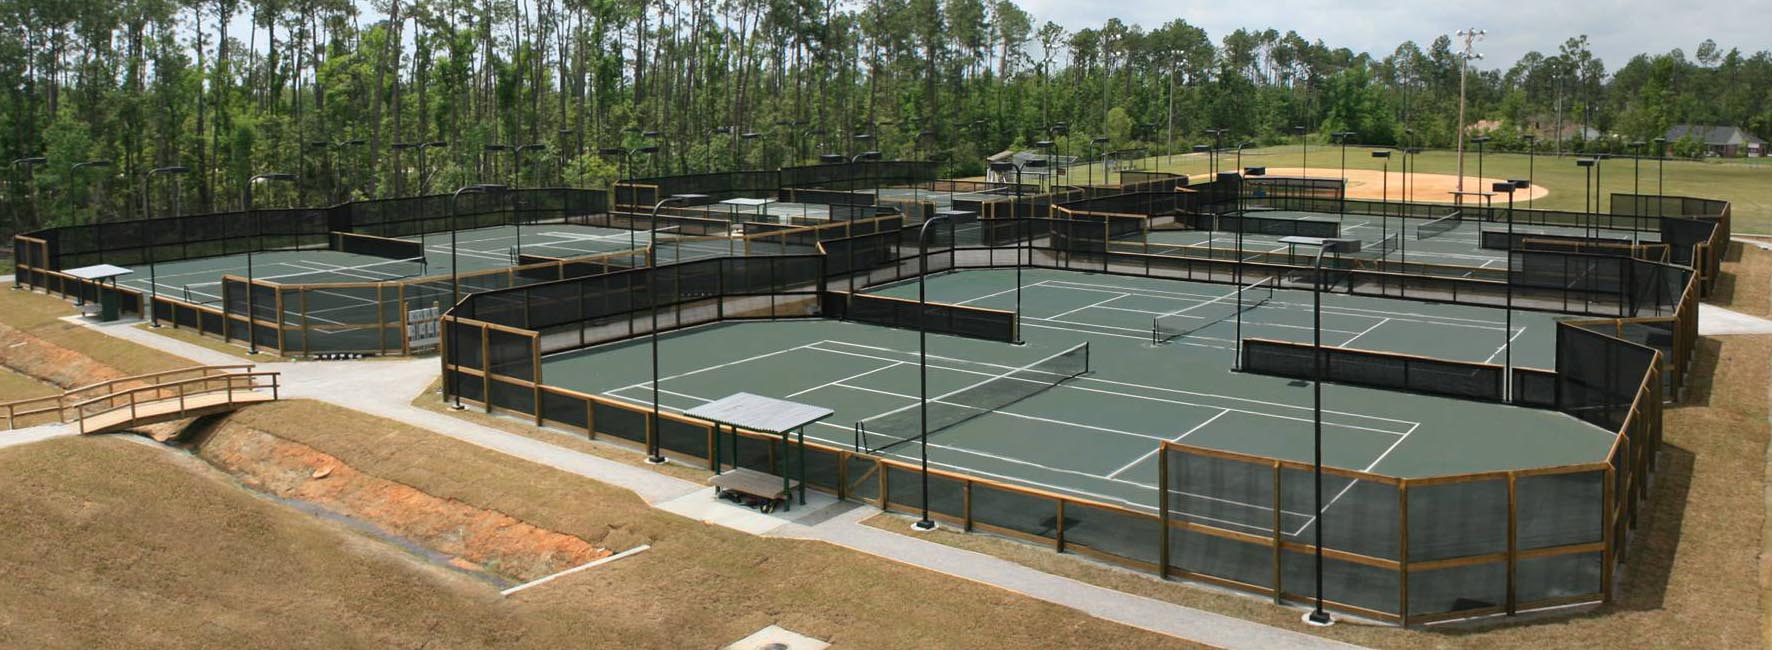 new tennis courts